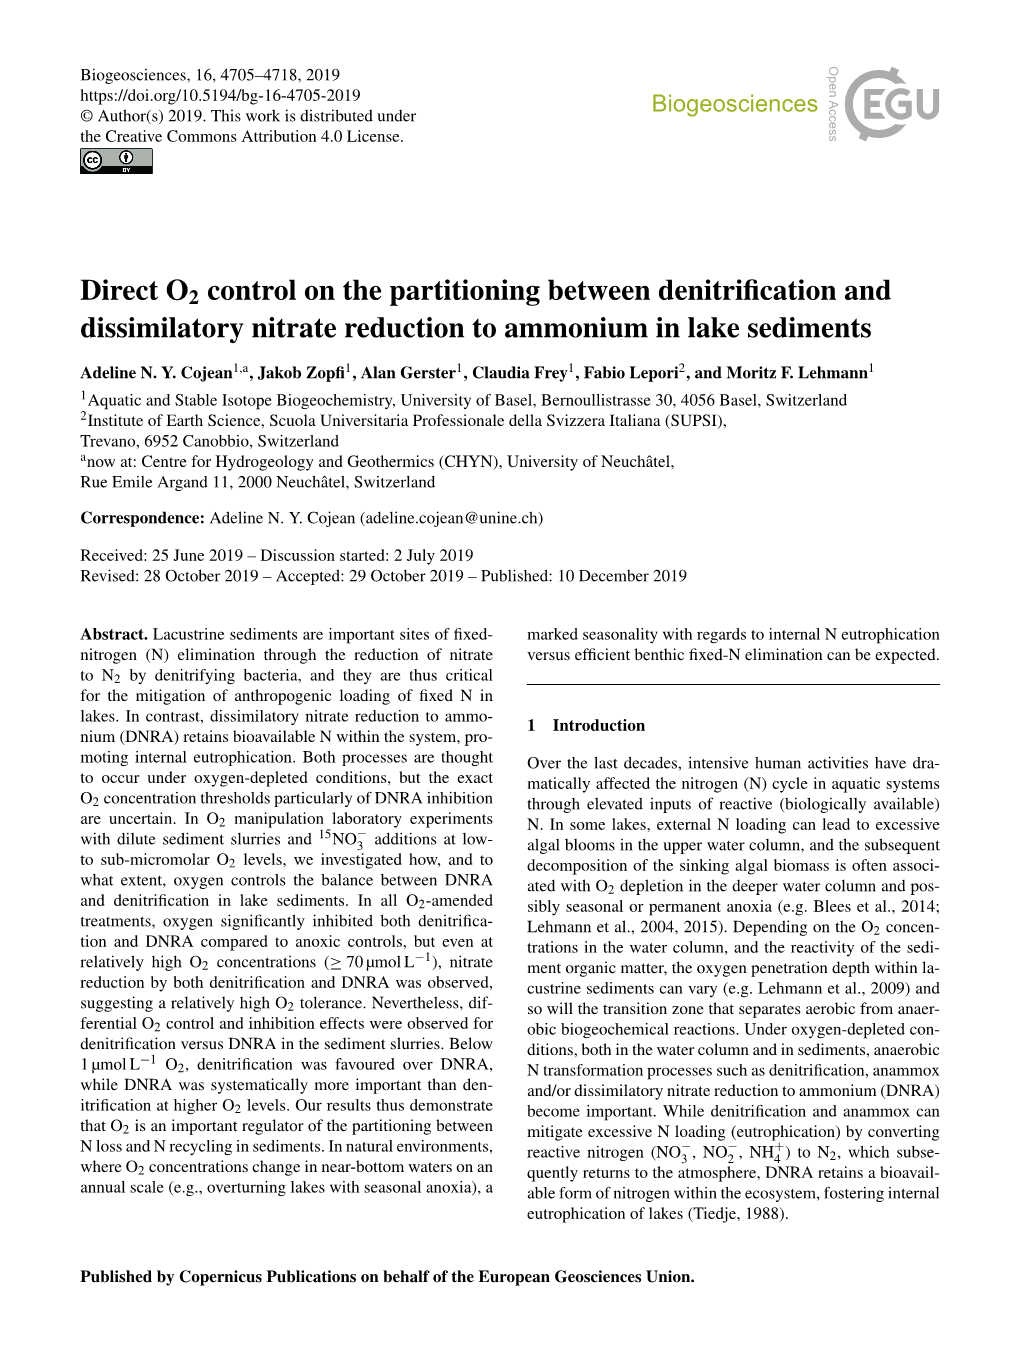 Direct O2 Control on the Partitioning Between Denitrification And